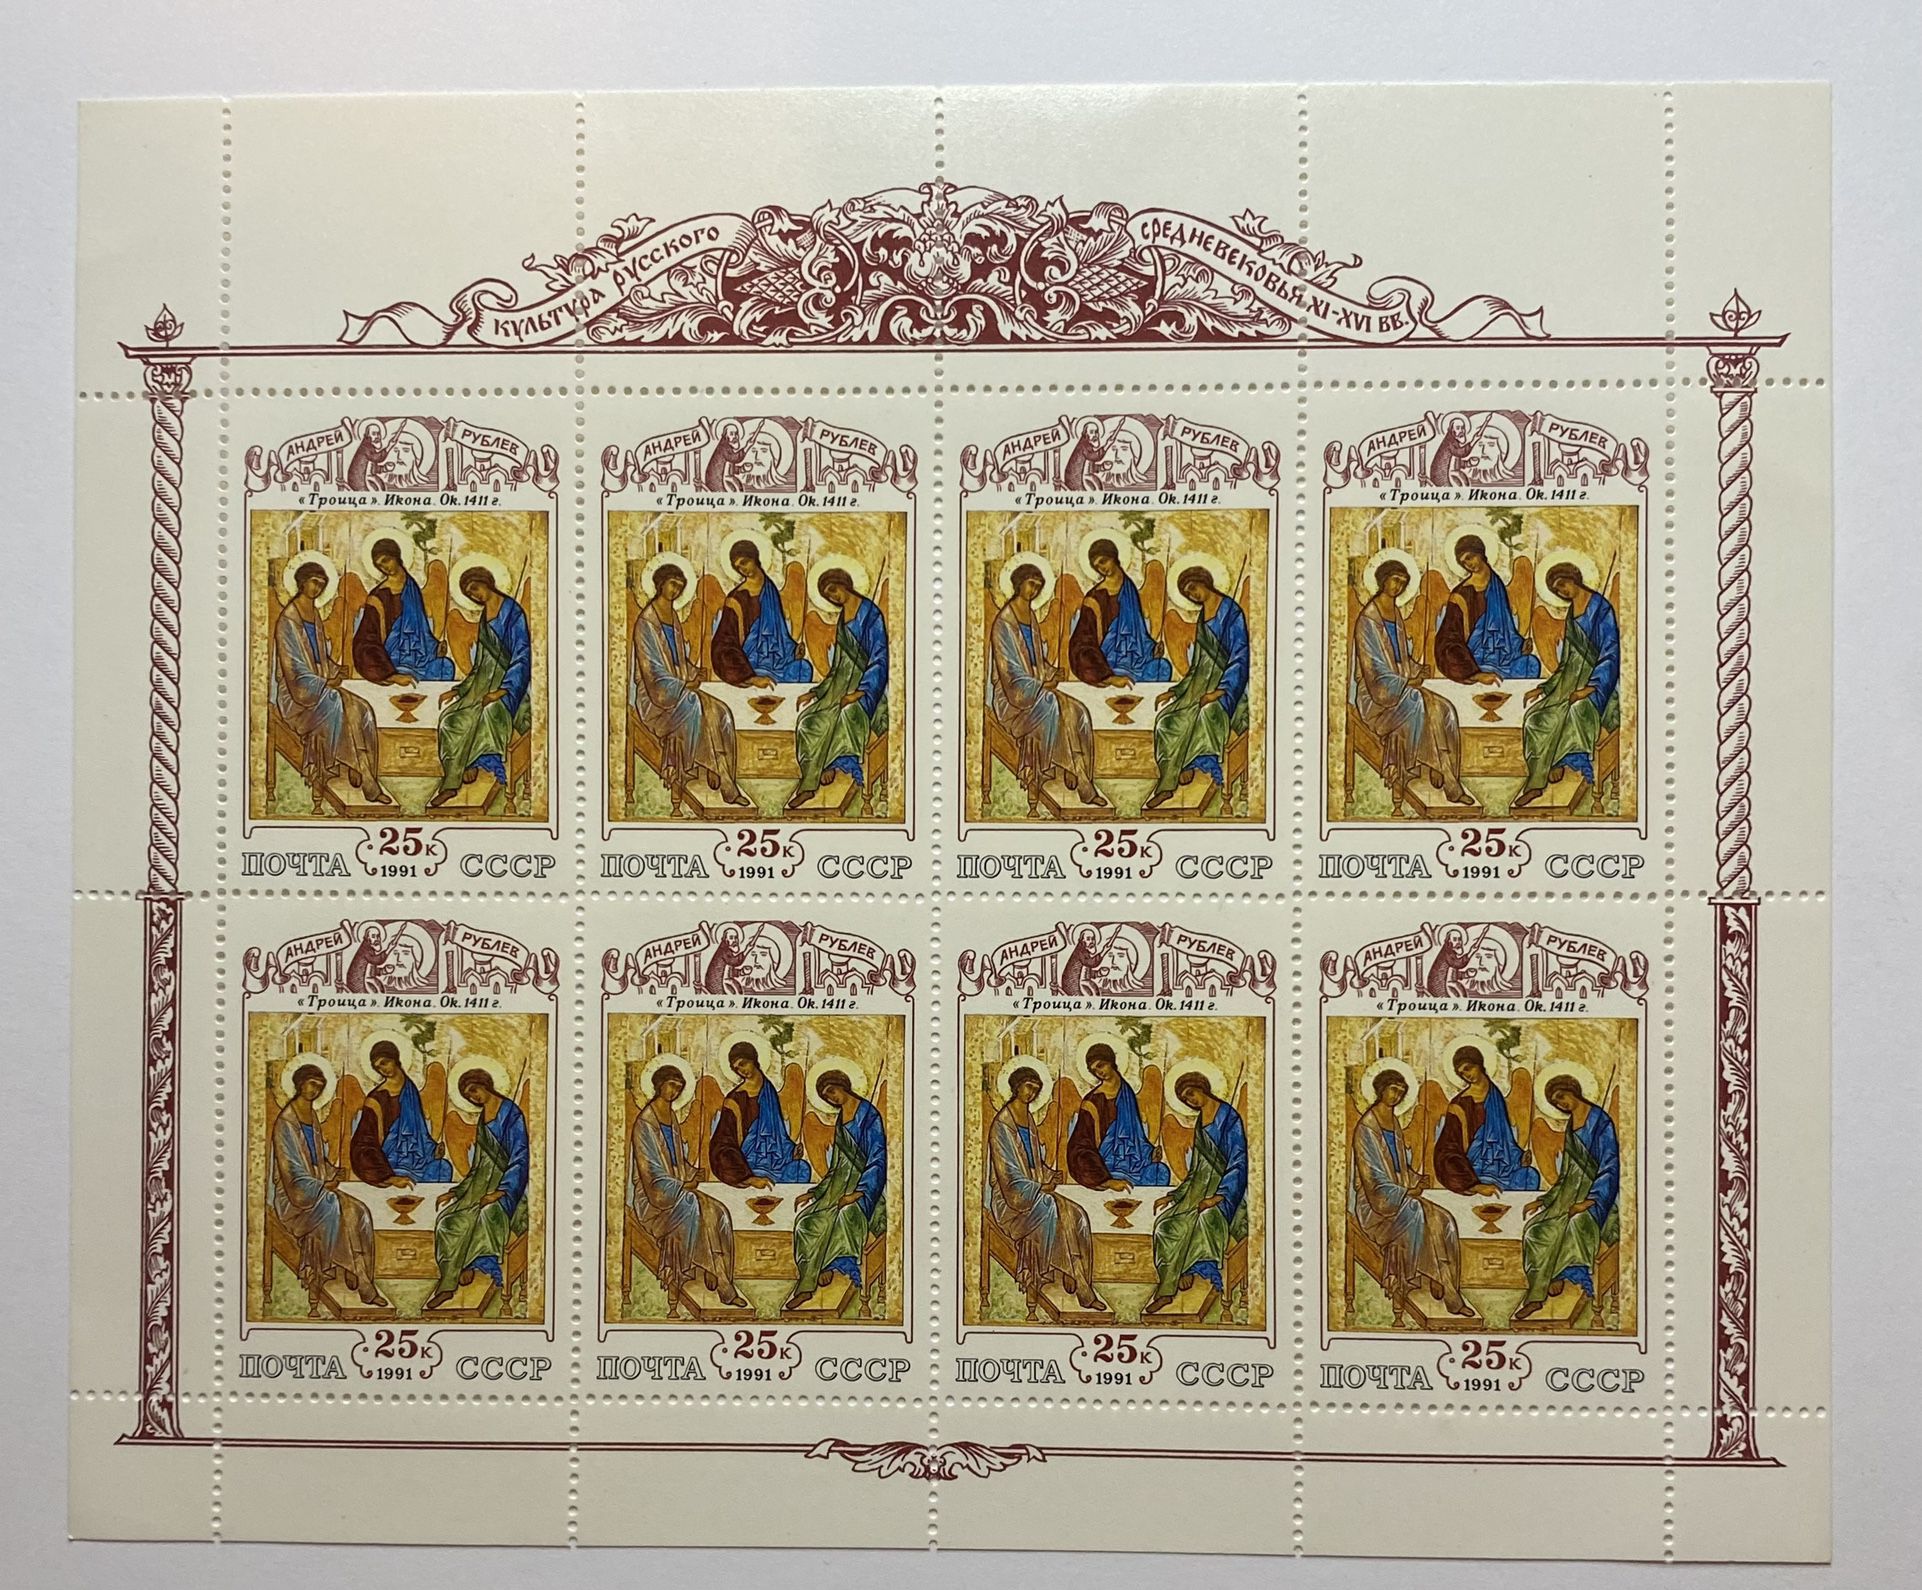 USSR Stamps . Soviet stamps "Trinity" - the icon of the Holy Trinity, painted by Andrey Rublev